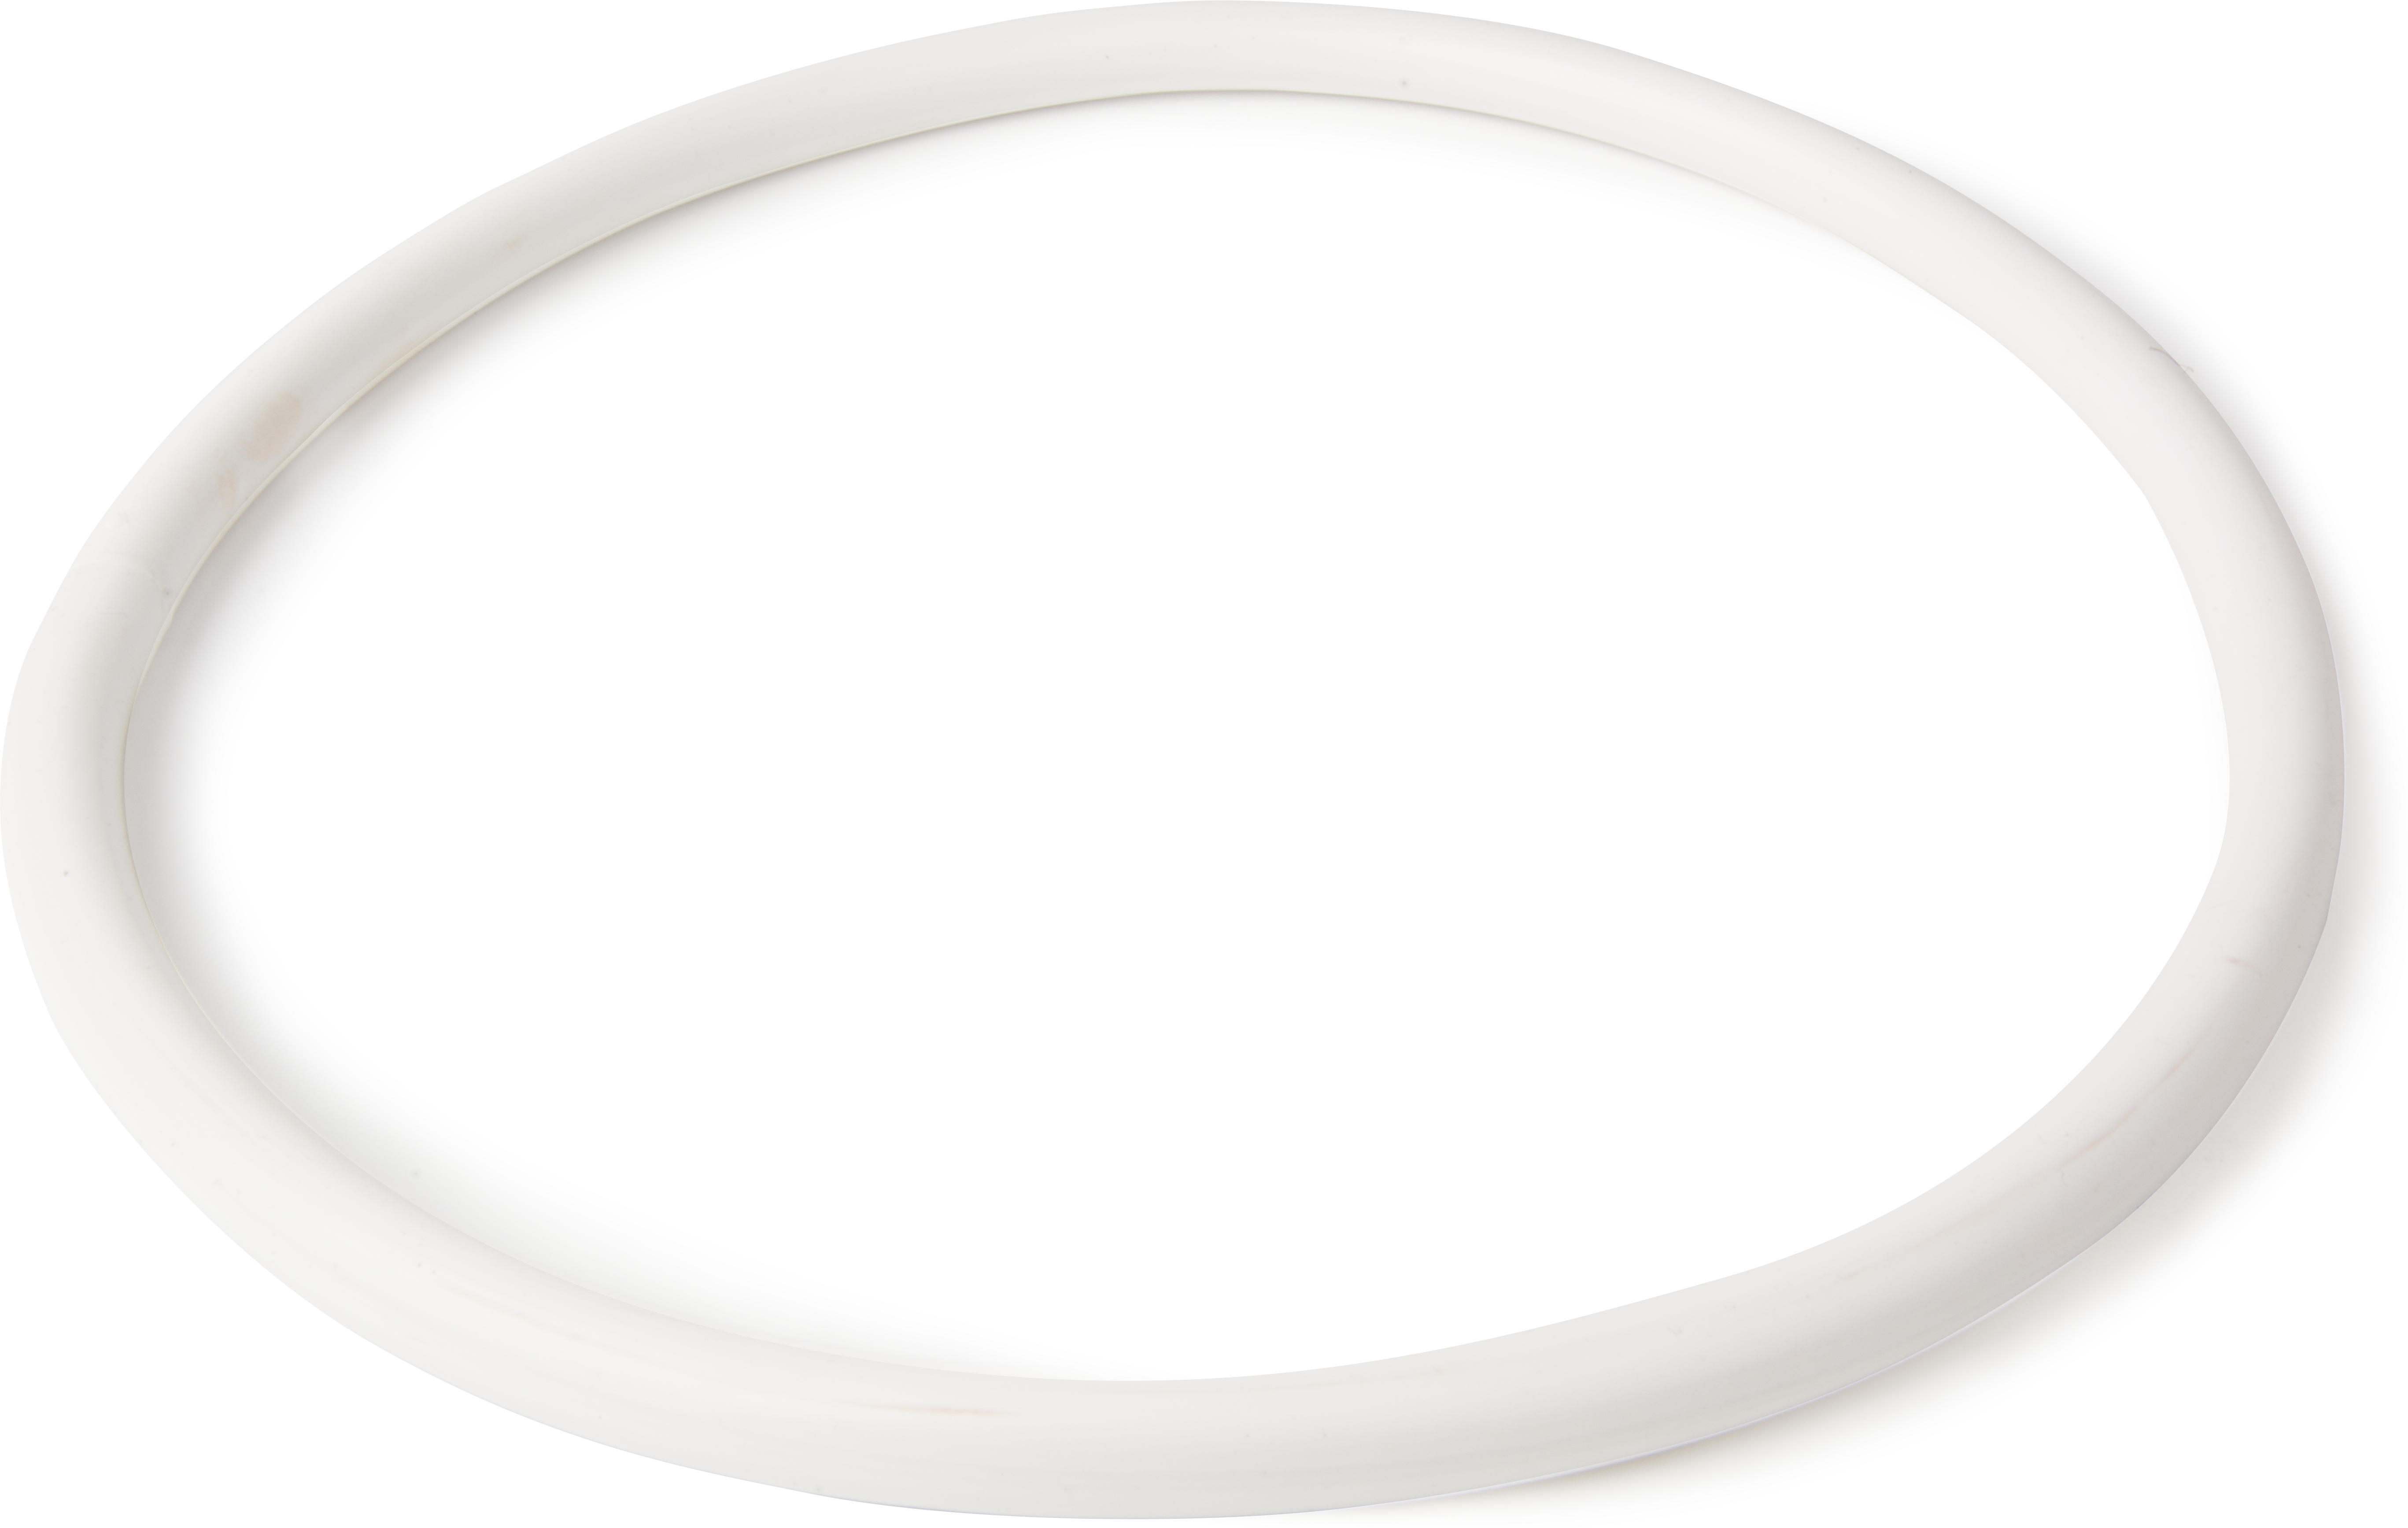 Cateraide Replacement Gasket for IT250/500 32.44 x .5 - White